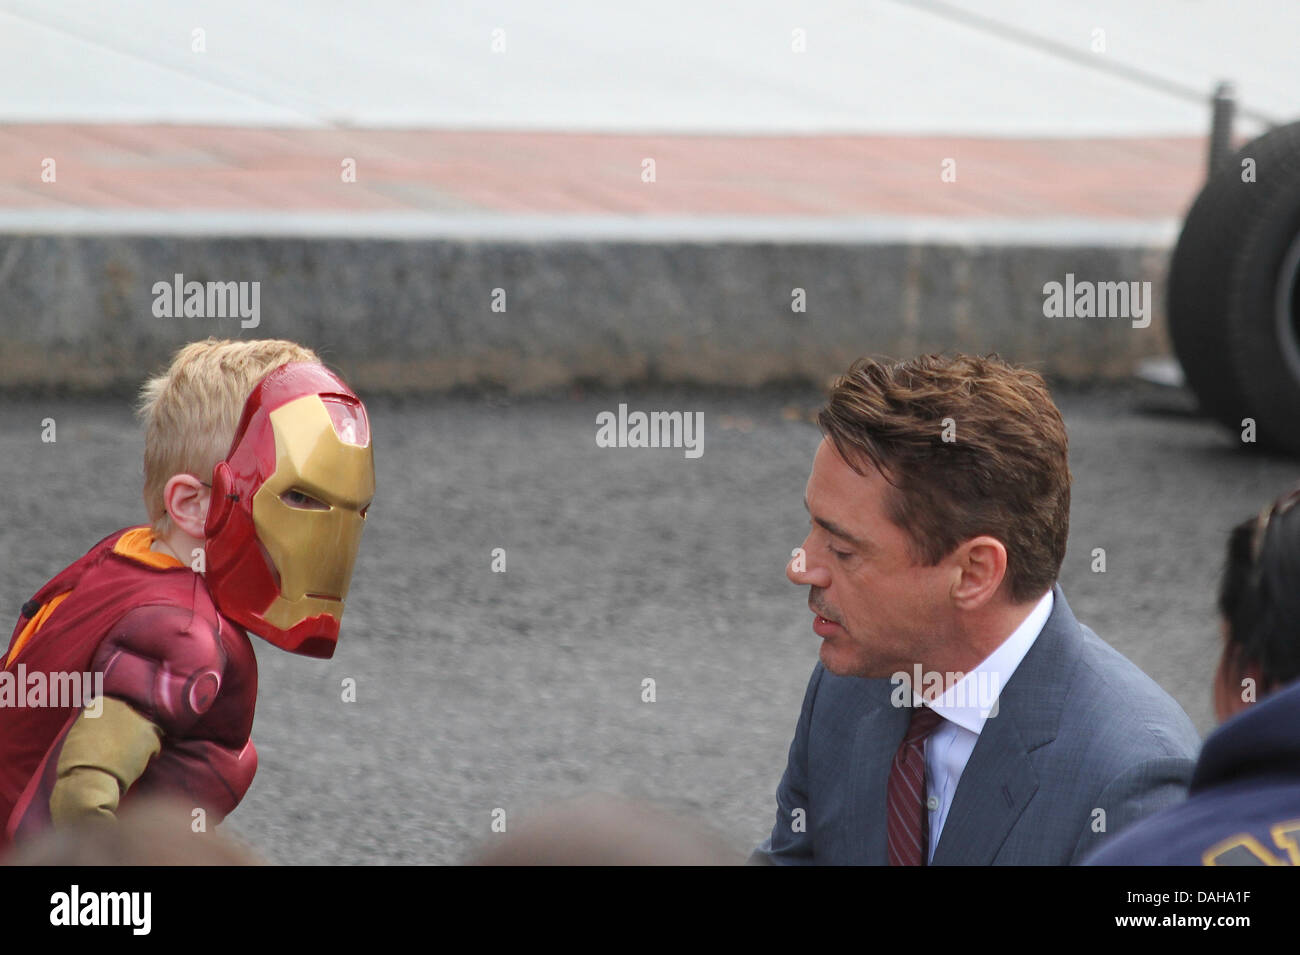 Dedham, Massachusetts. Robert Downey Jr talks to a boy in an 'Iron Man' mask and costume on the set of 'The Judge' in Dedham, Massachusetts, on July 12, 2013 Credit:  Susan Pease/Alamy Live News Stock Photo